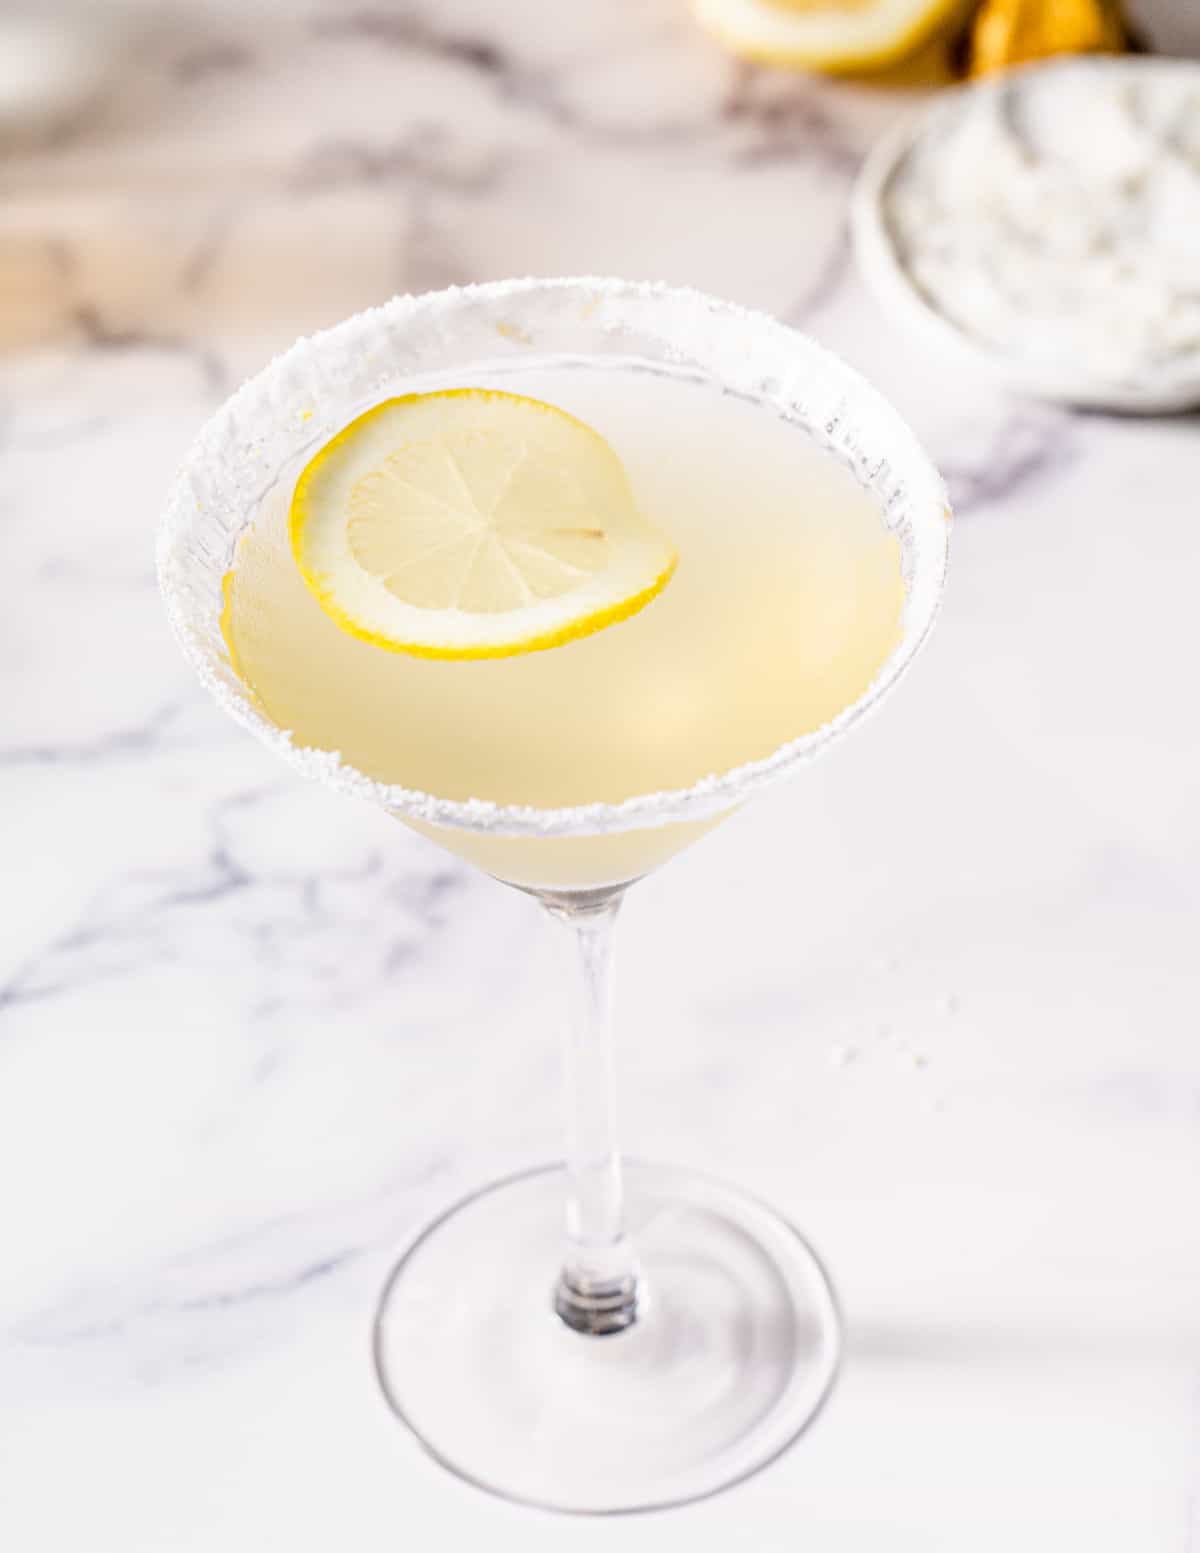 Overhead view of a Limoncello Martini with a sugared rim on a marble countertop. A cut lemon and a plate of sugar are in the background. A lemon slice is floating in the drink.